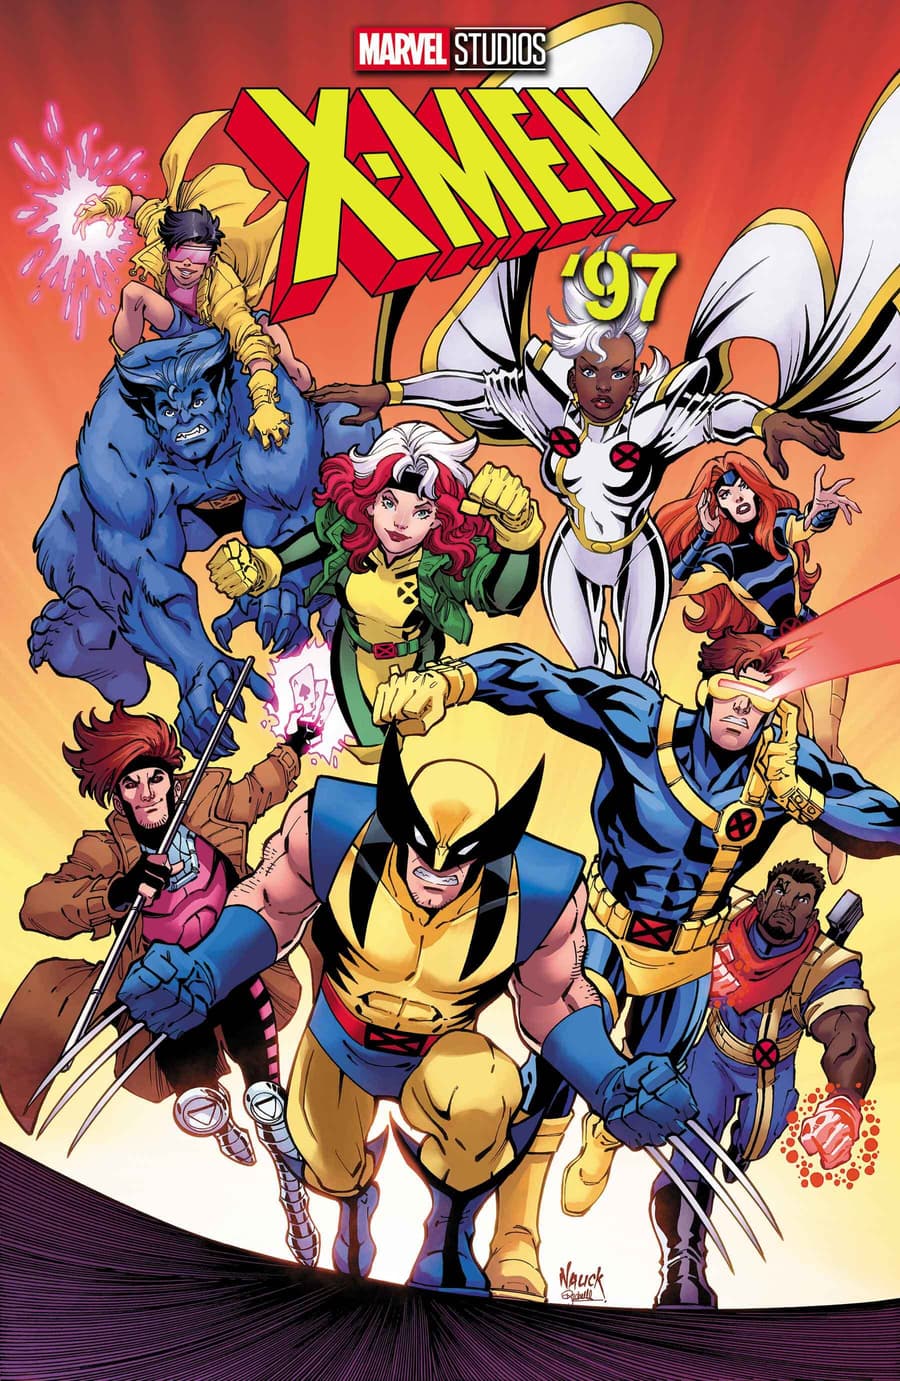 X-MEN '97 #1 cover by Todd Nauck